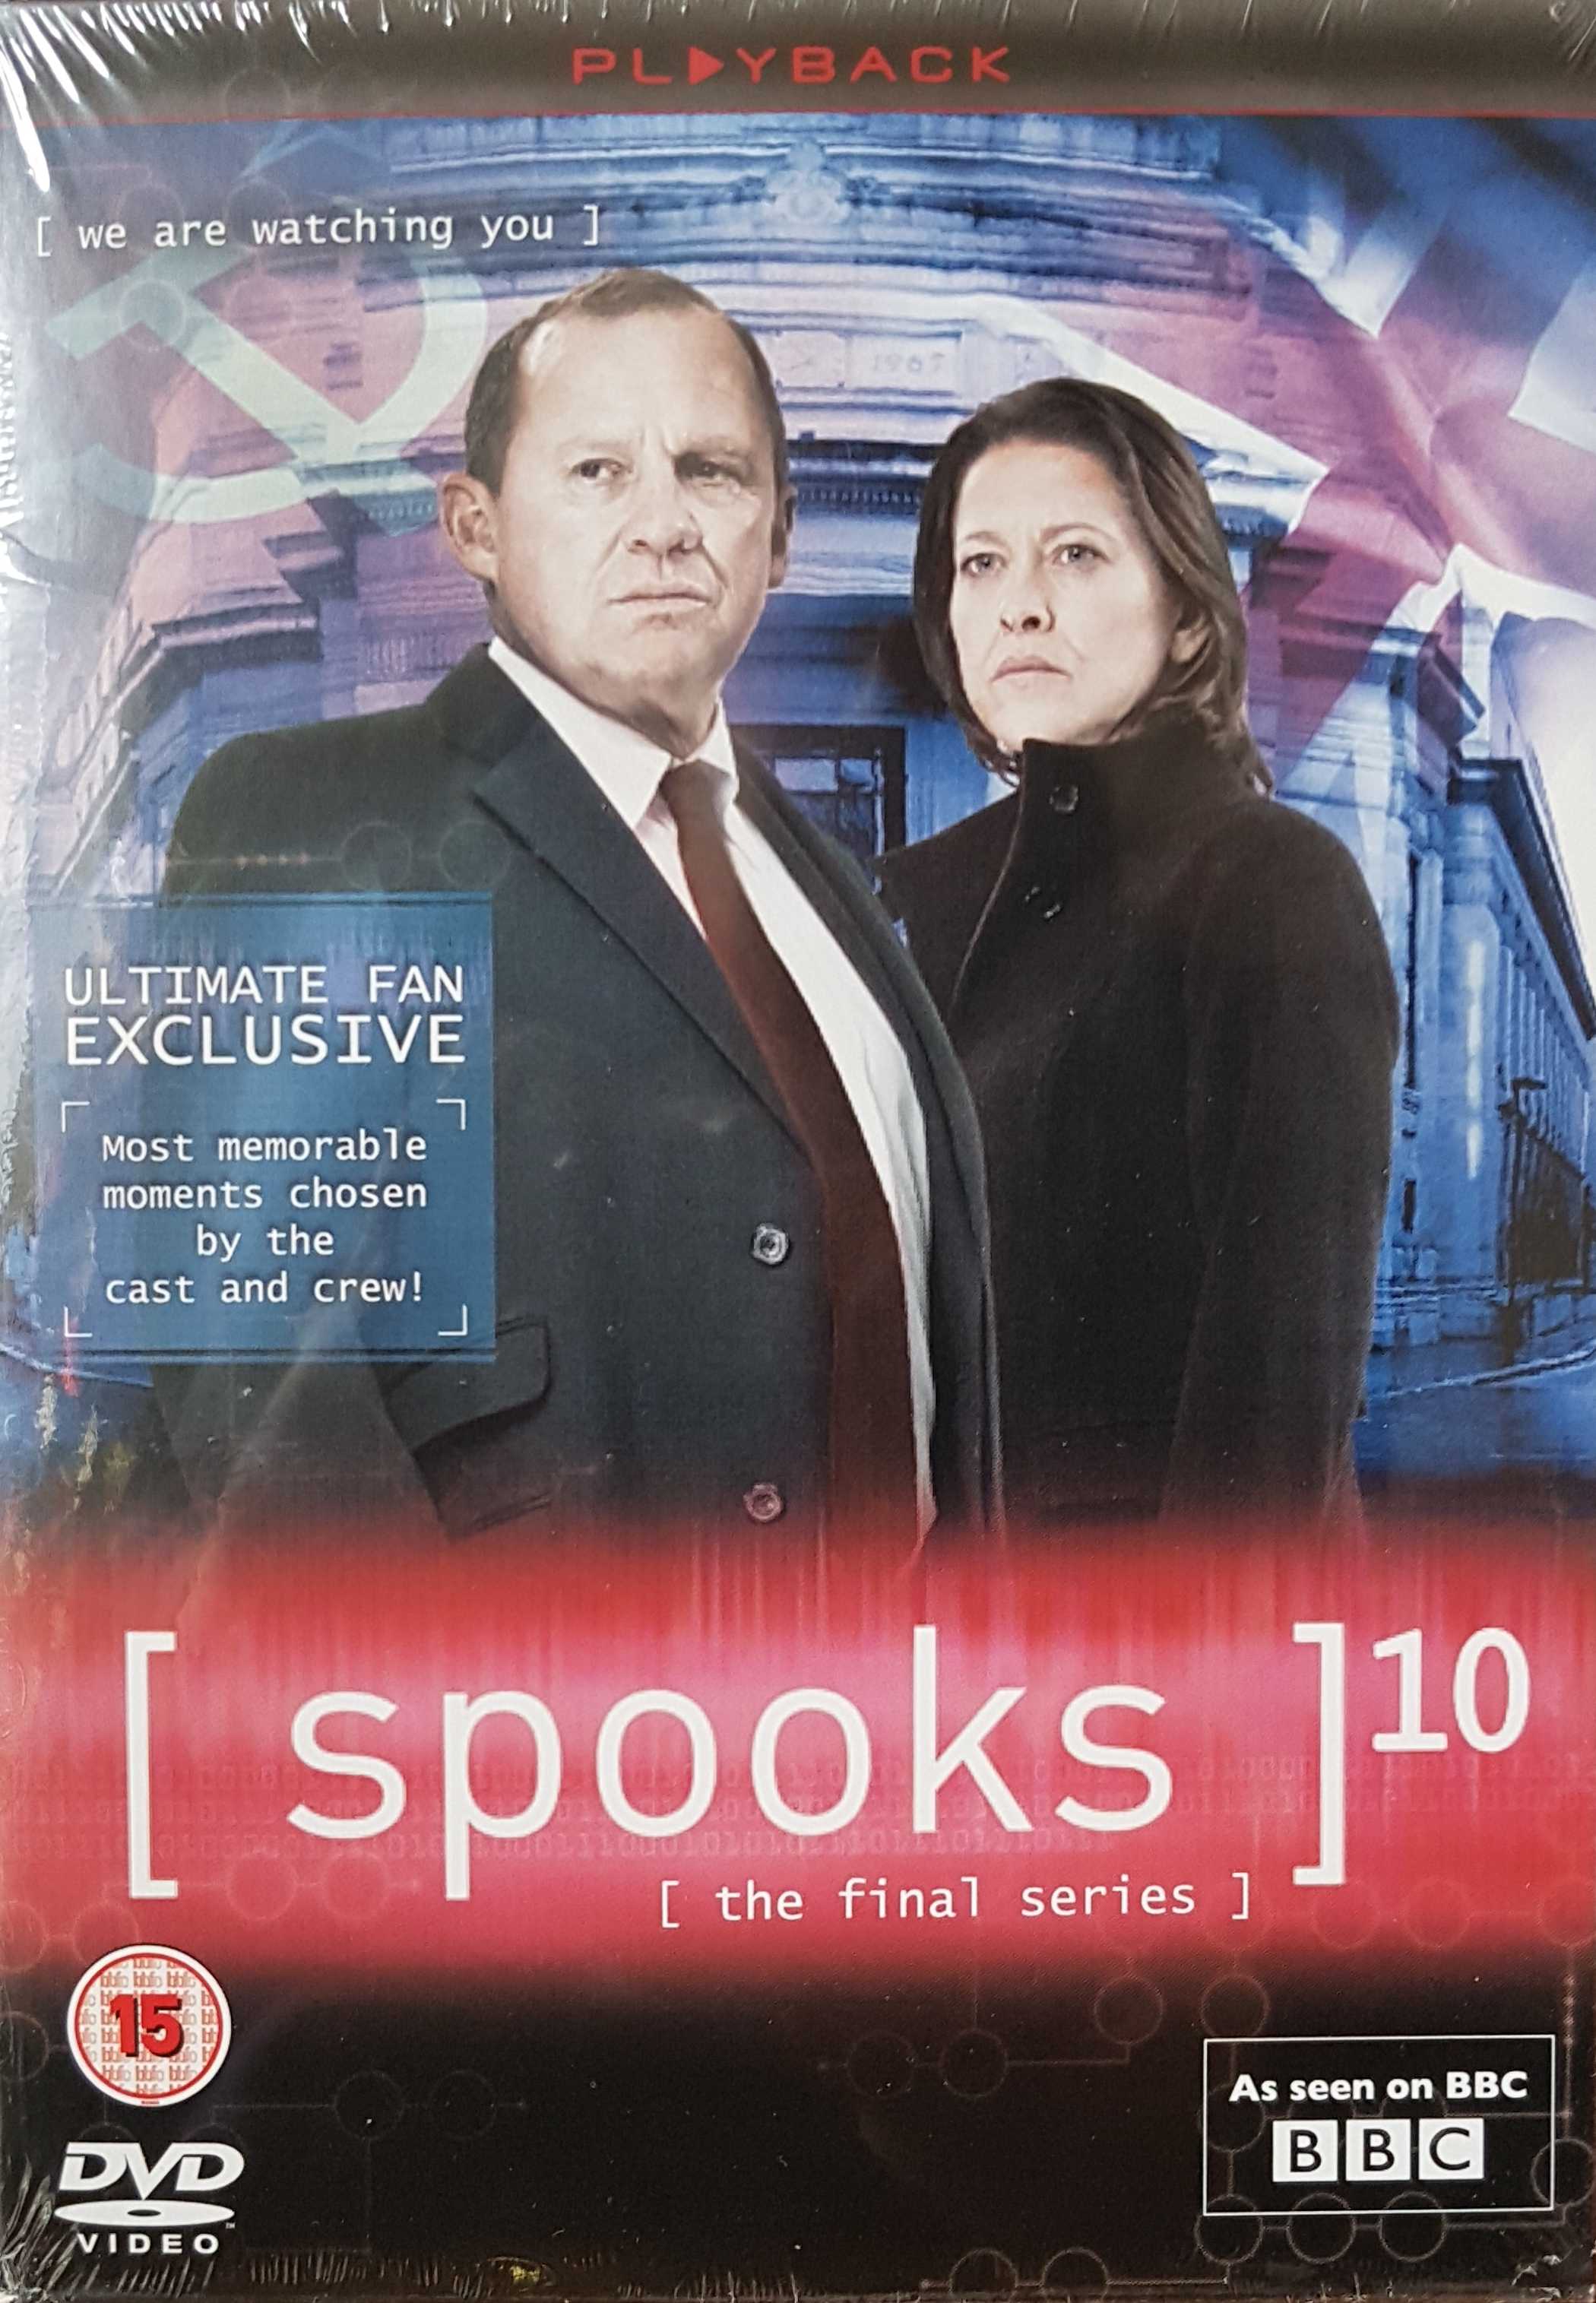 Picture of [ spooks ]10 by artist Jonathan Brackley / Sam Vincent / Sean Cook / Anthony Neilson from the BBC dvds - Records and Tapes library